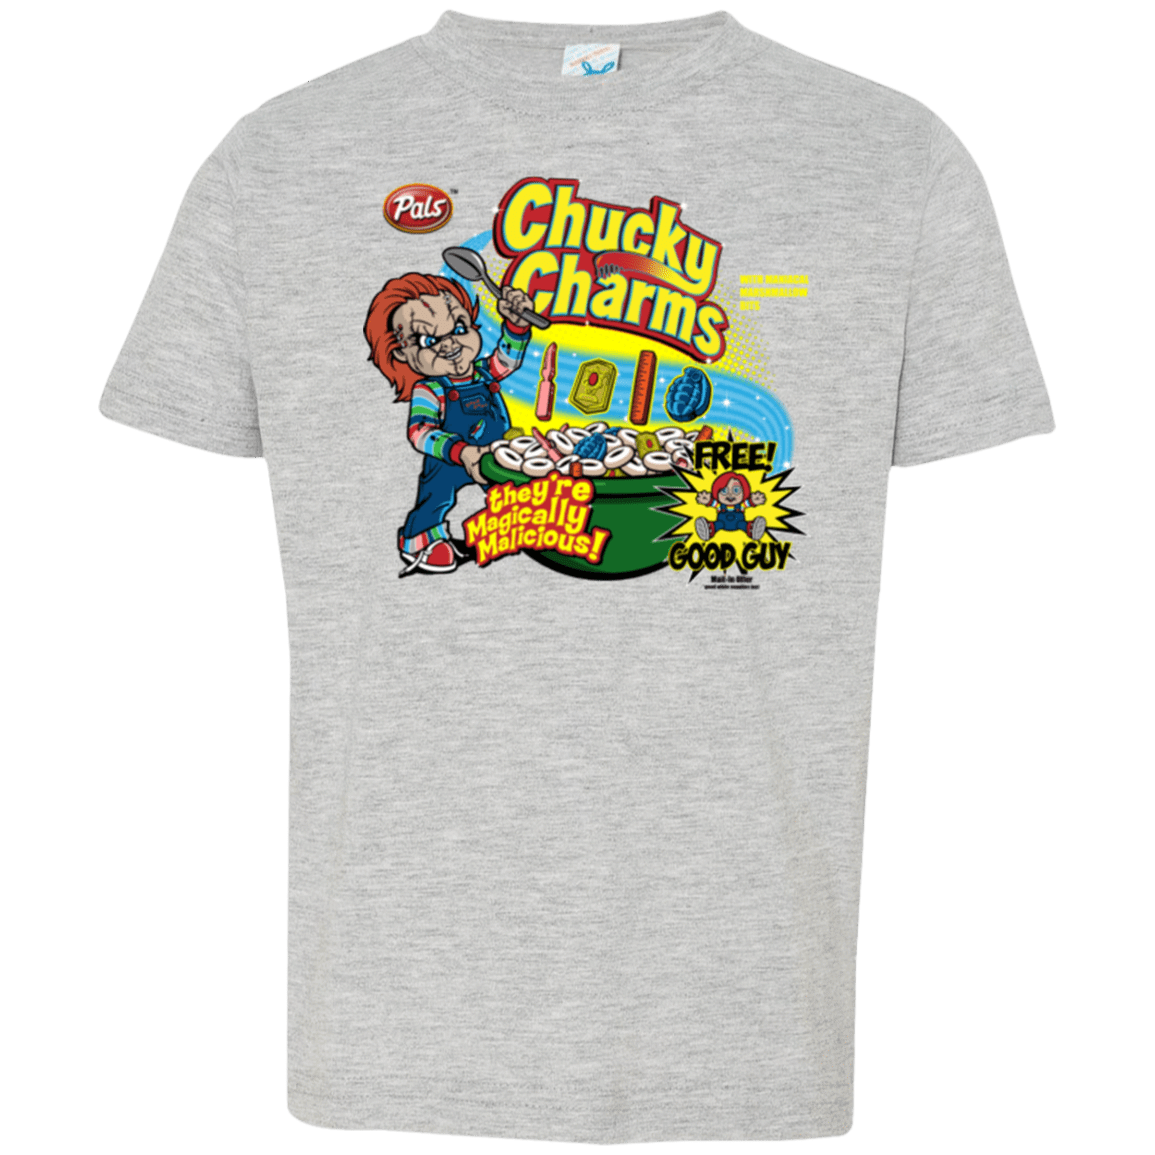 T-Shirts Heather / 2T Chucky Charms Toddler Premium T-Shirt